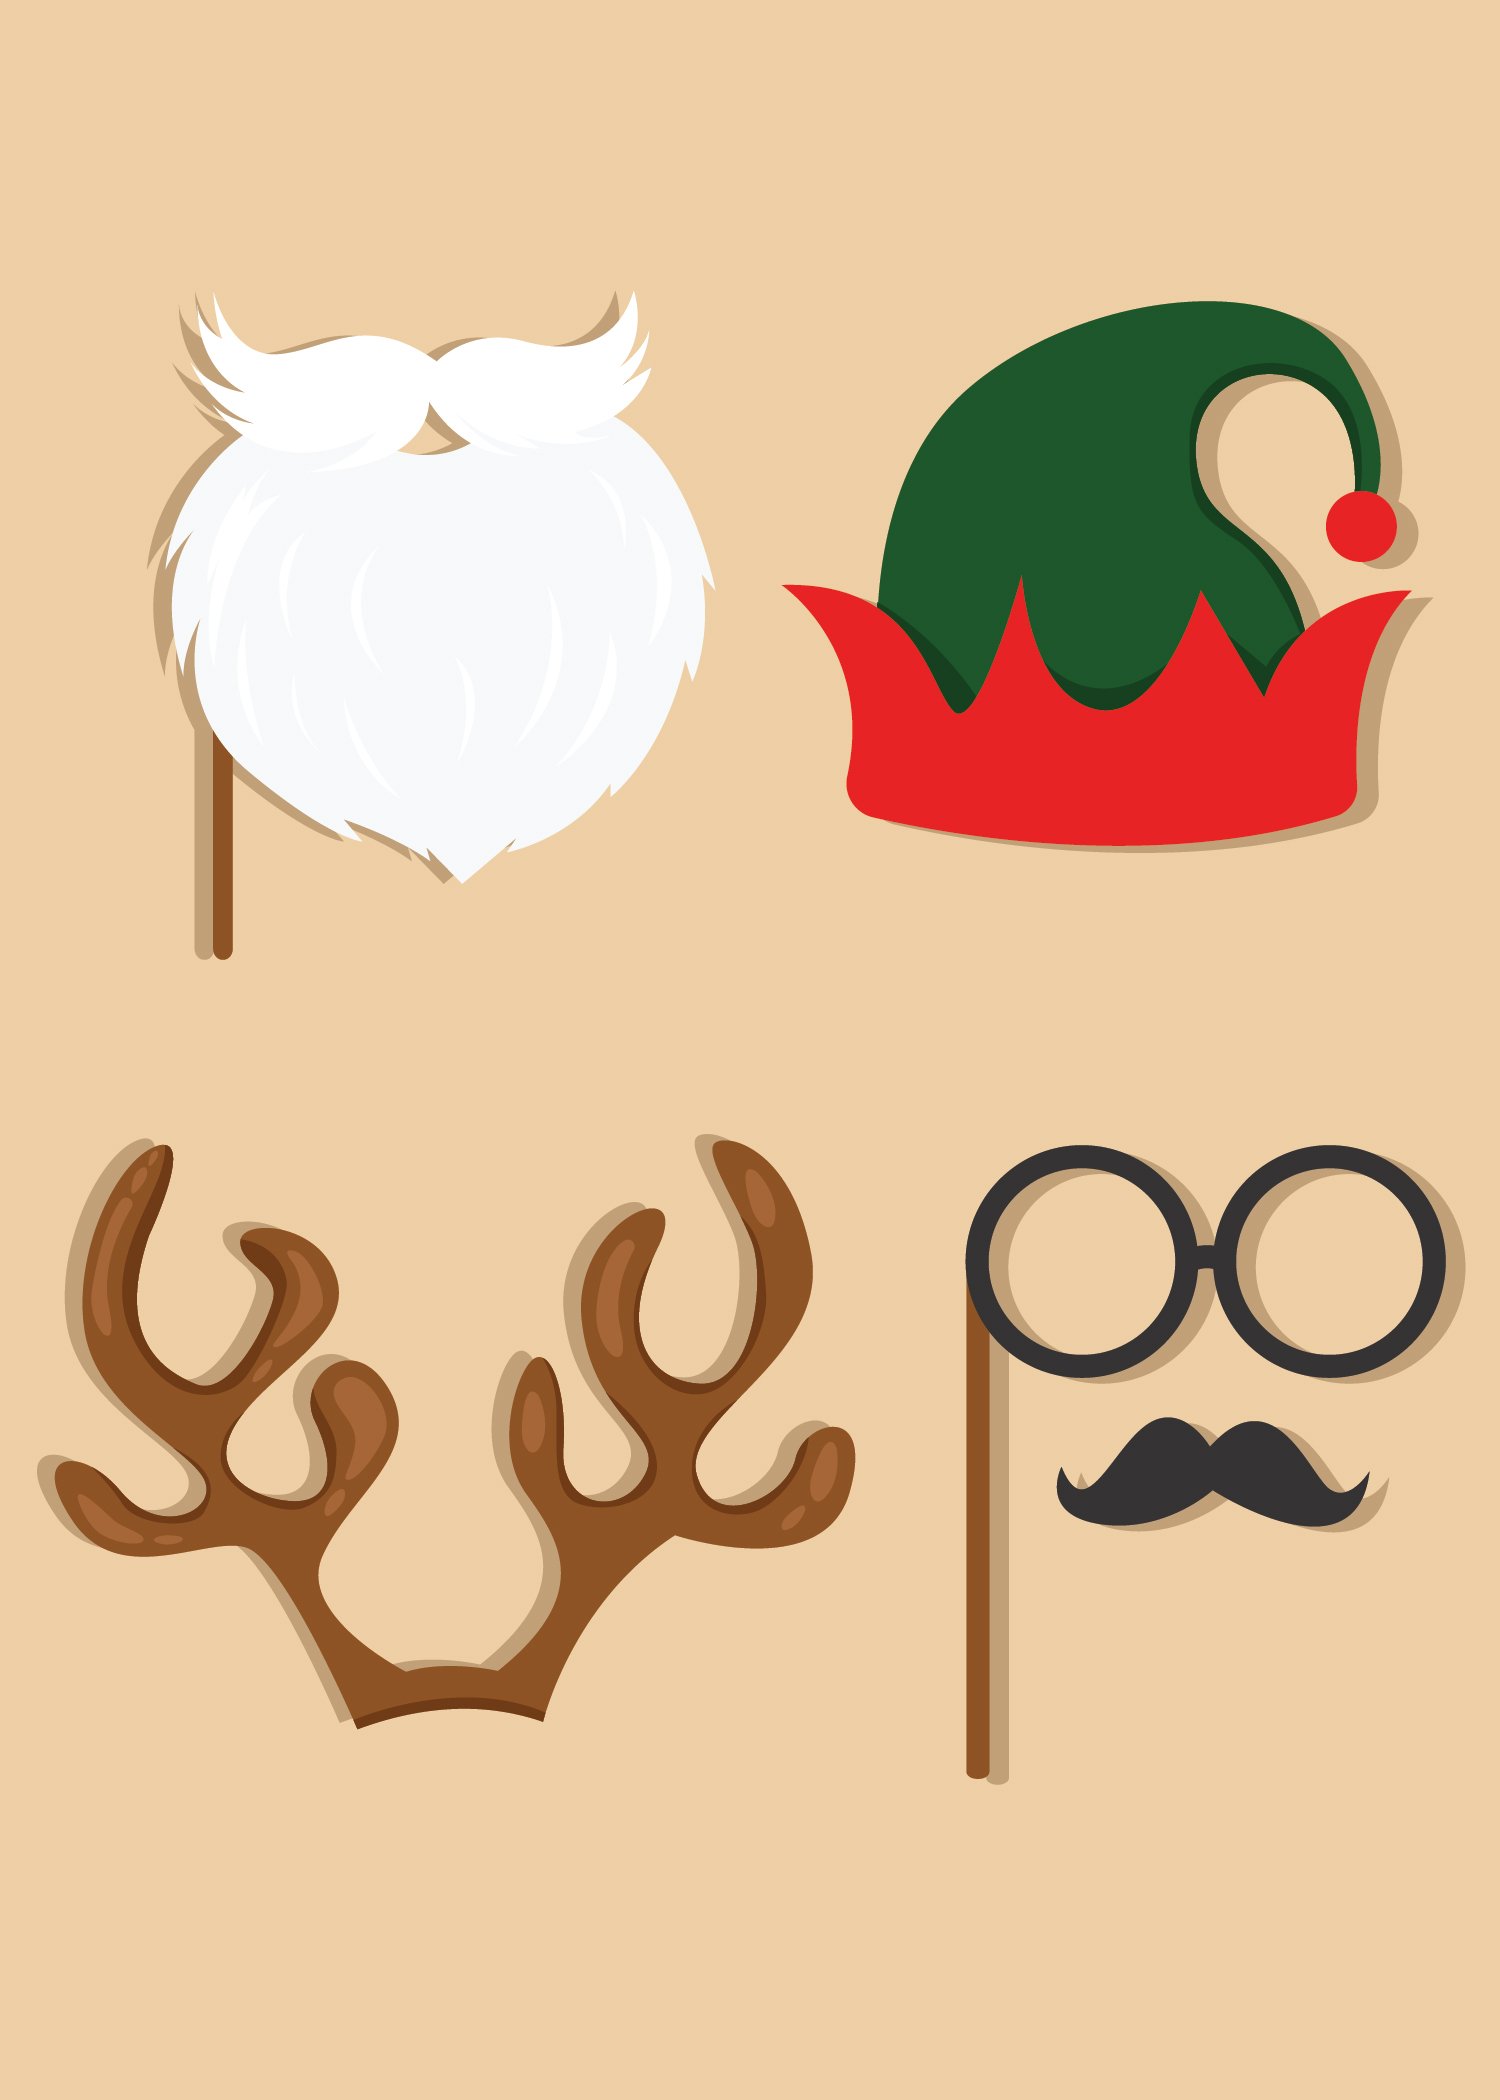 Free Christmas Photo Prop Template in Illustrator, PSD, EPS, SVG, JPG, PNG